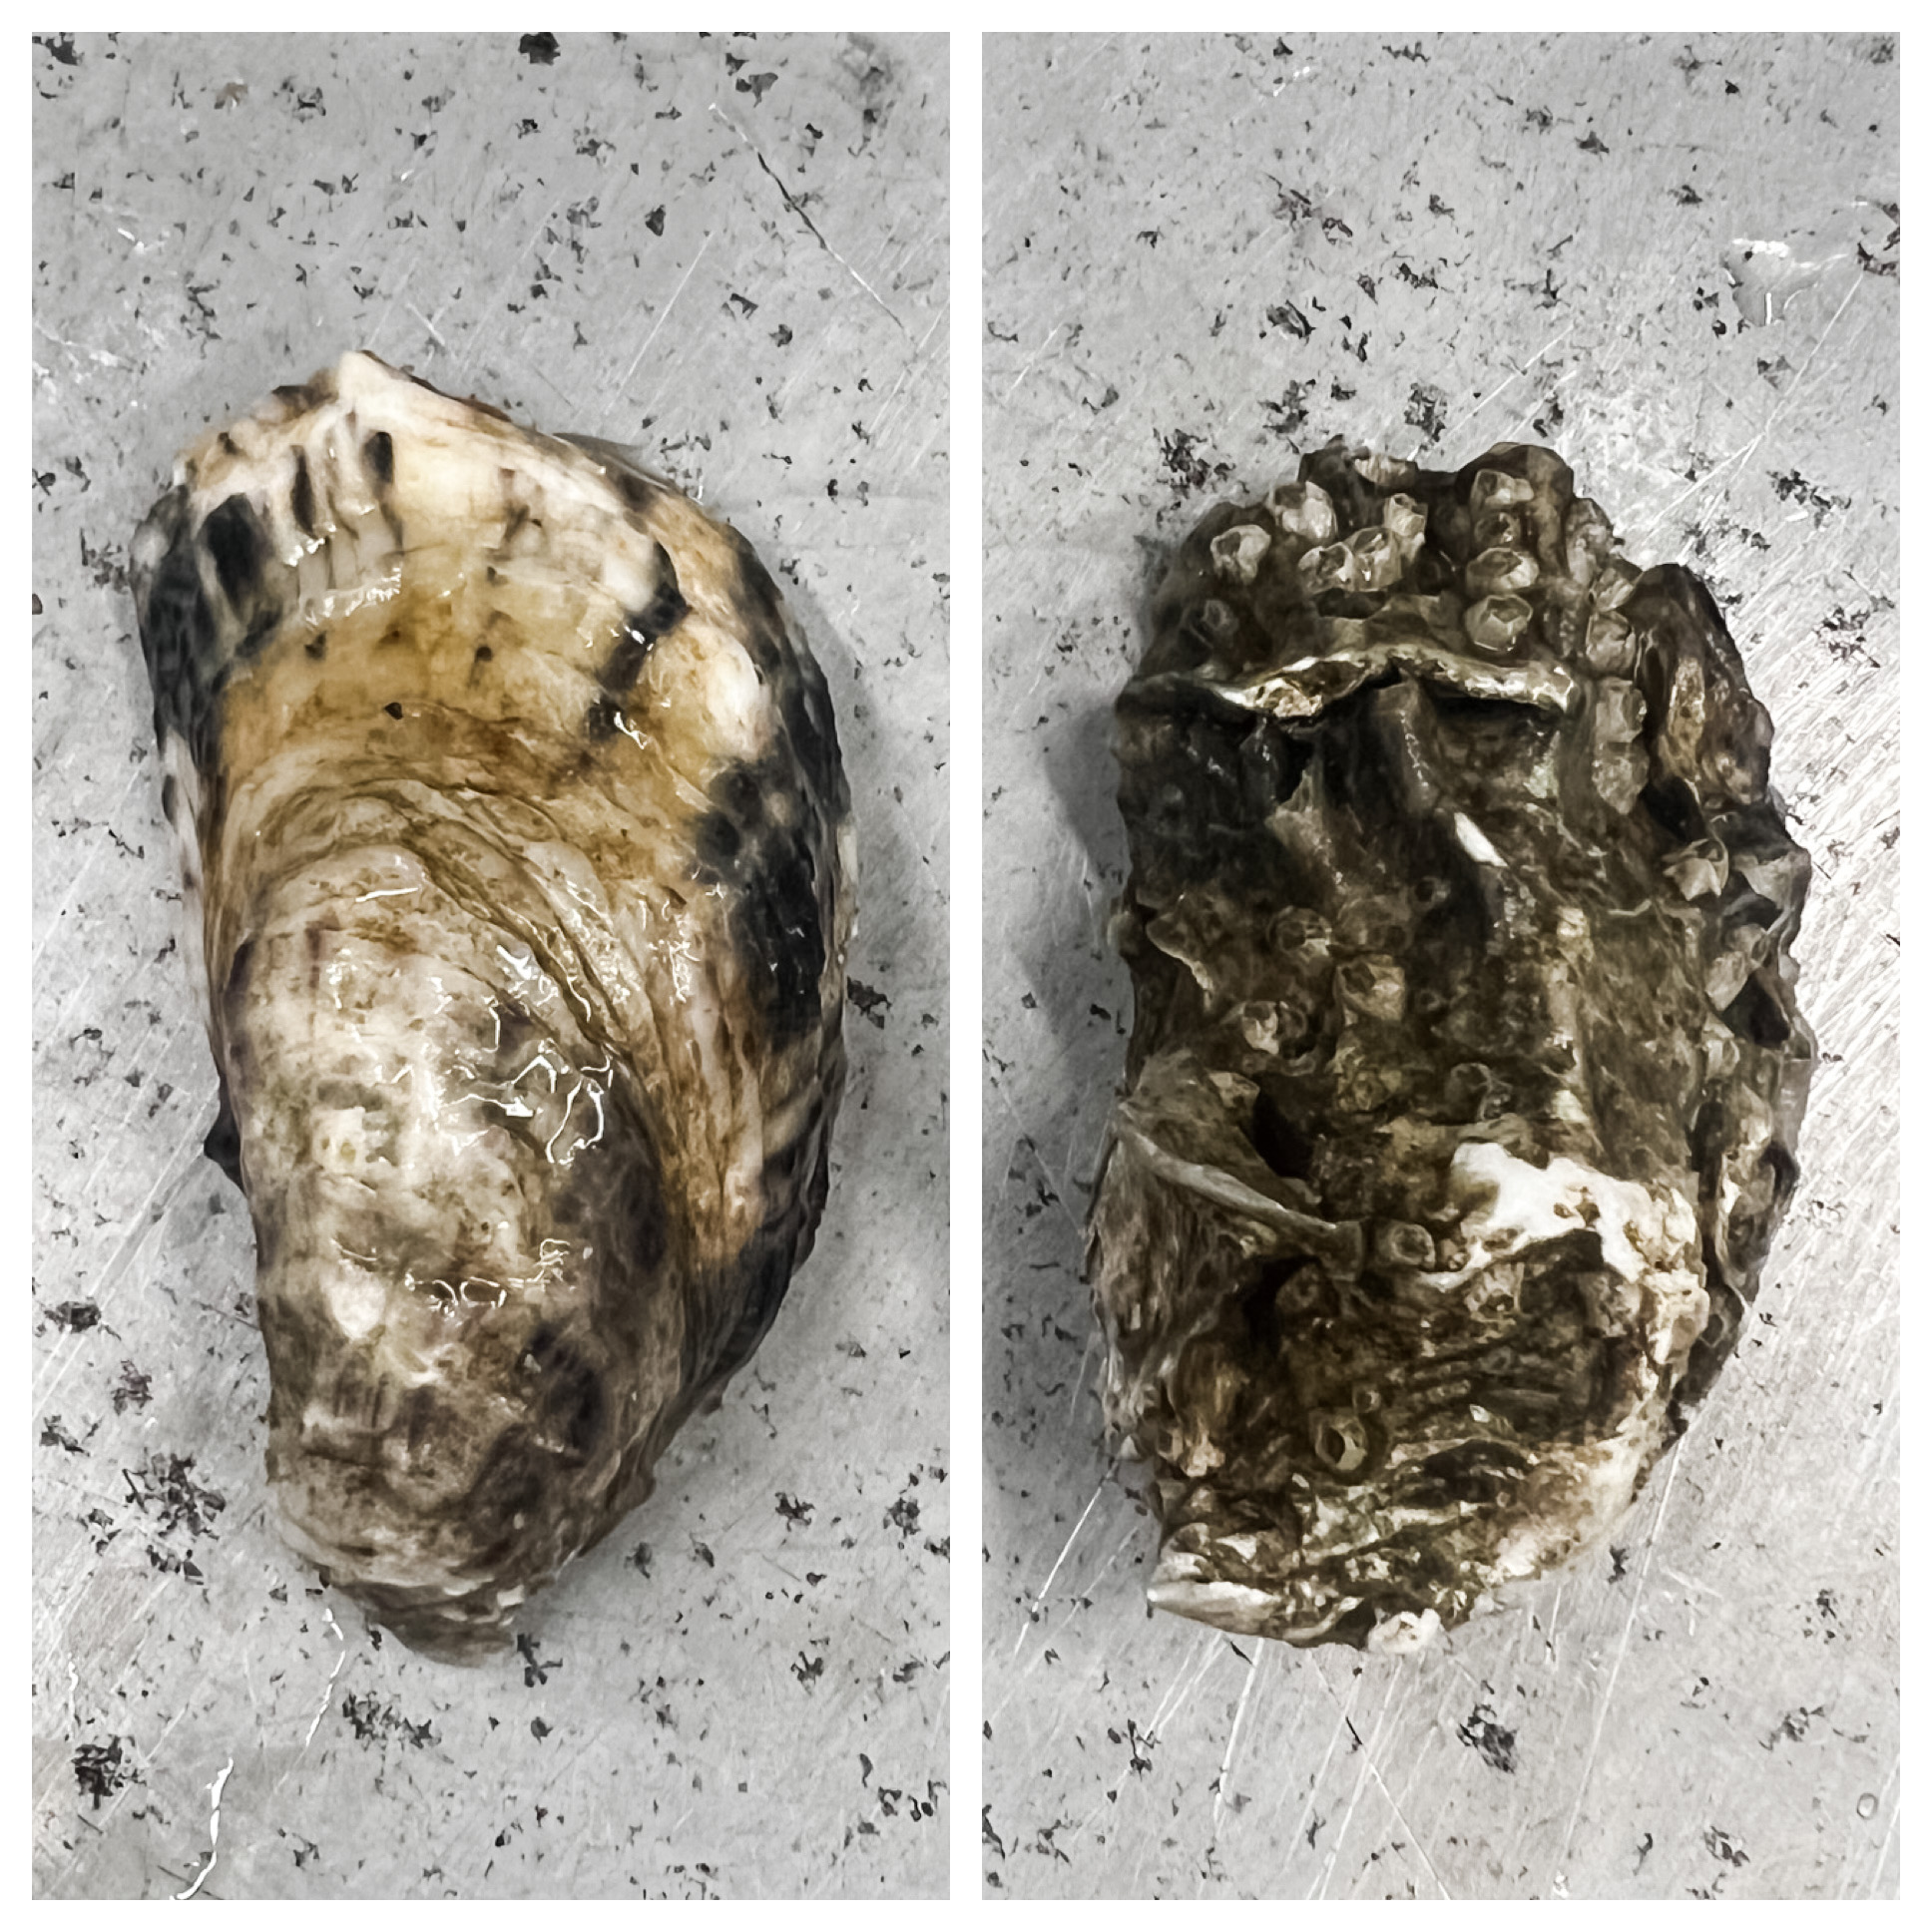 Oyster Shell Comparison